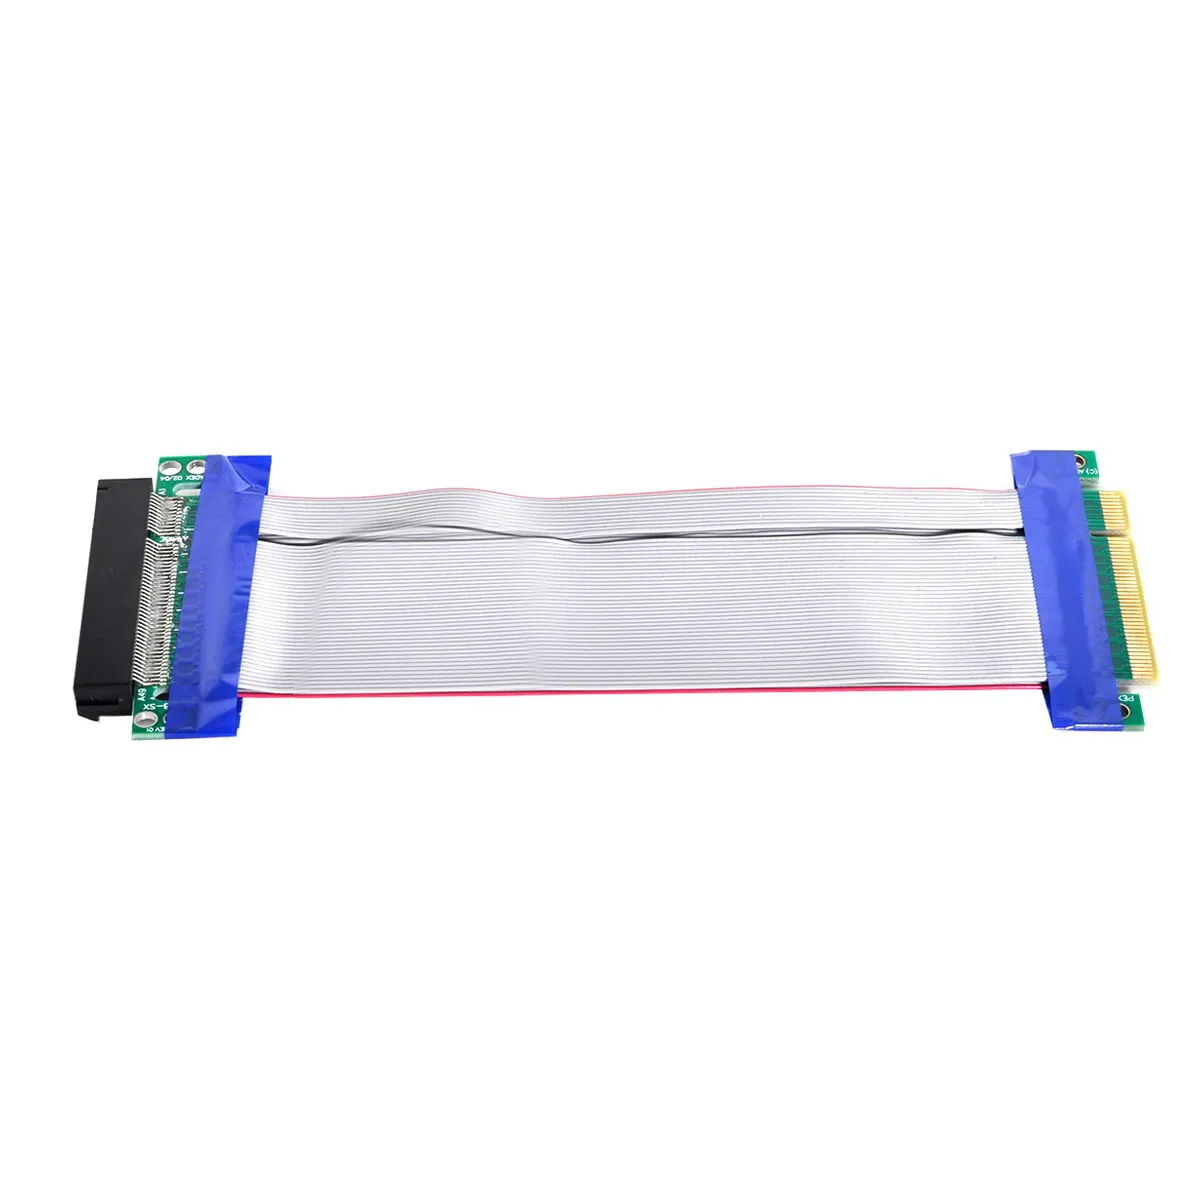 

PCI-E Express 8X to 8x Male to Female Slot Riser Extender Card Ribbon Flexible Cable 20cm